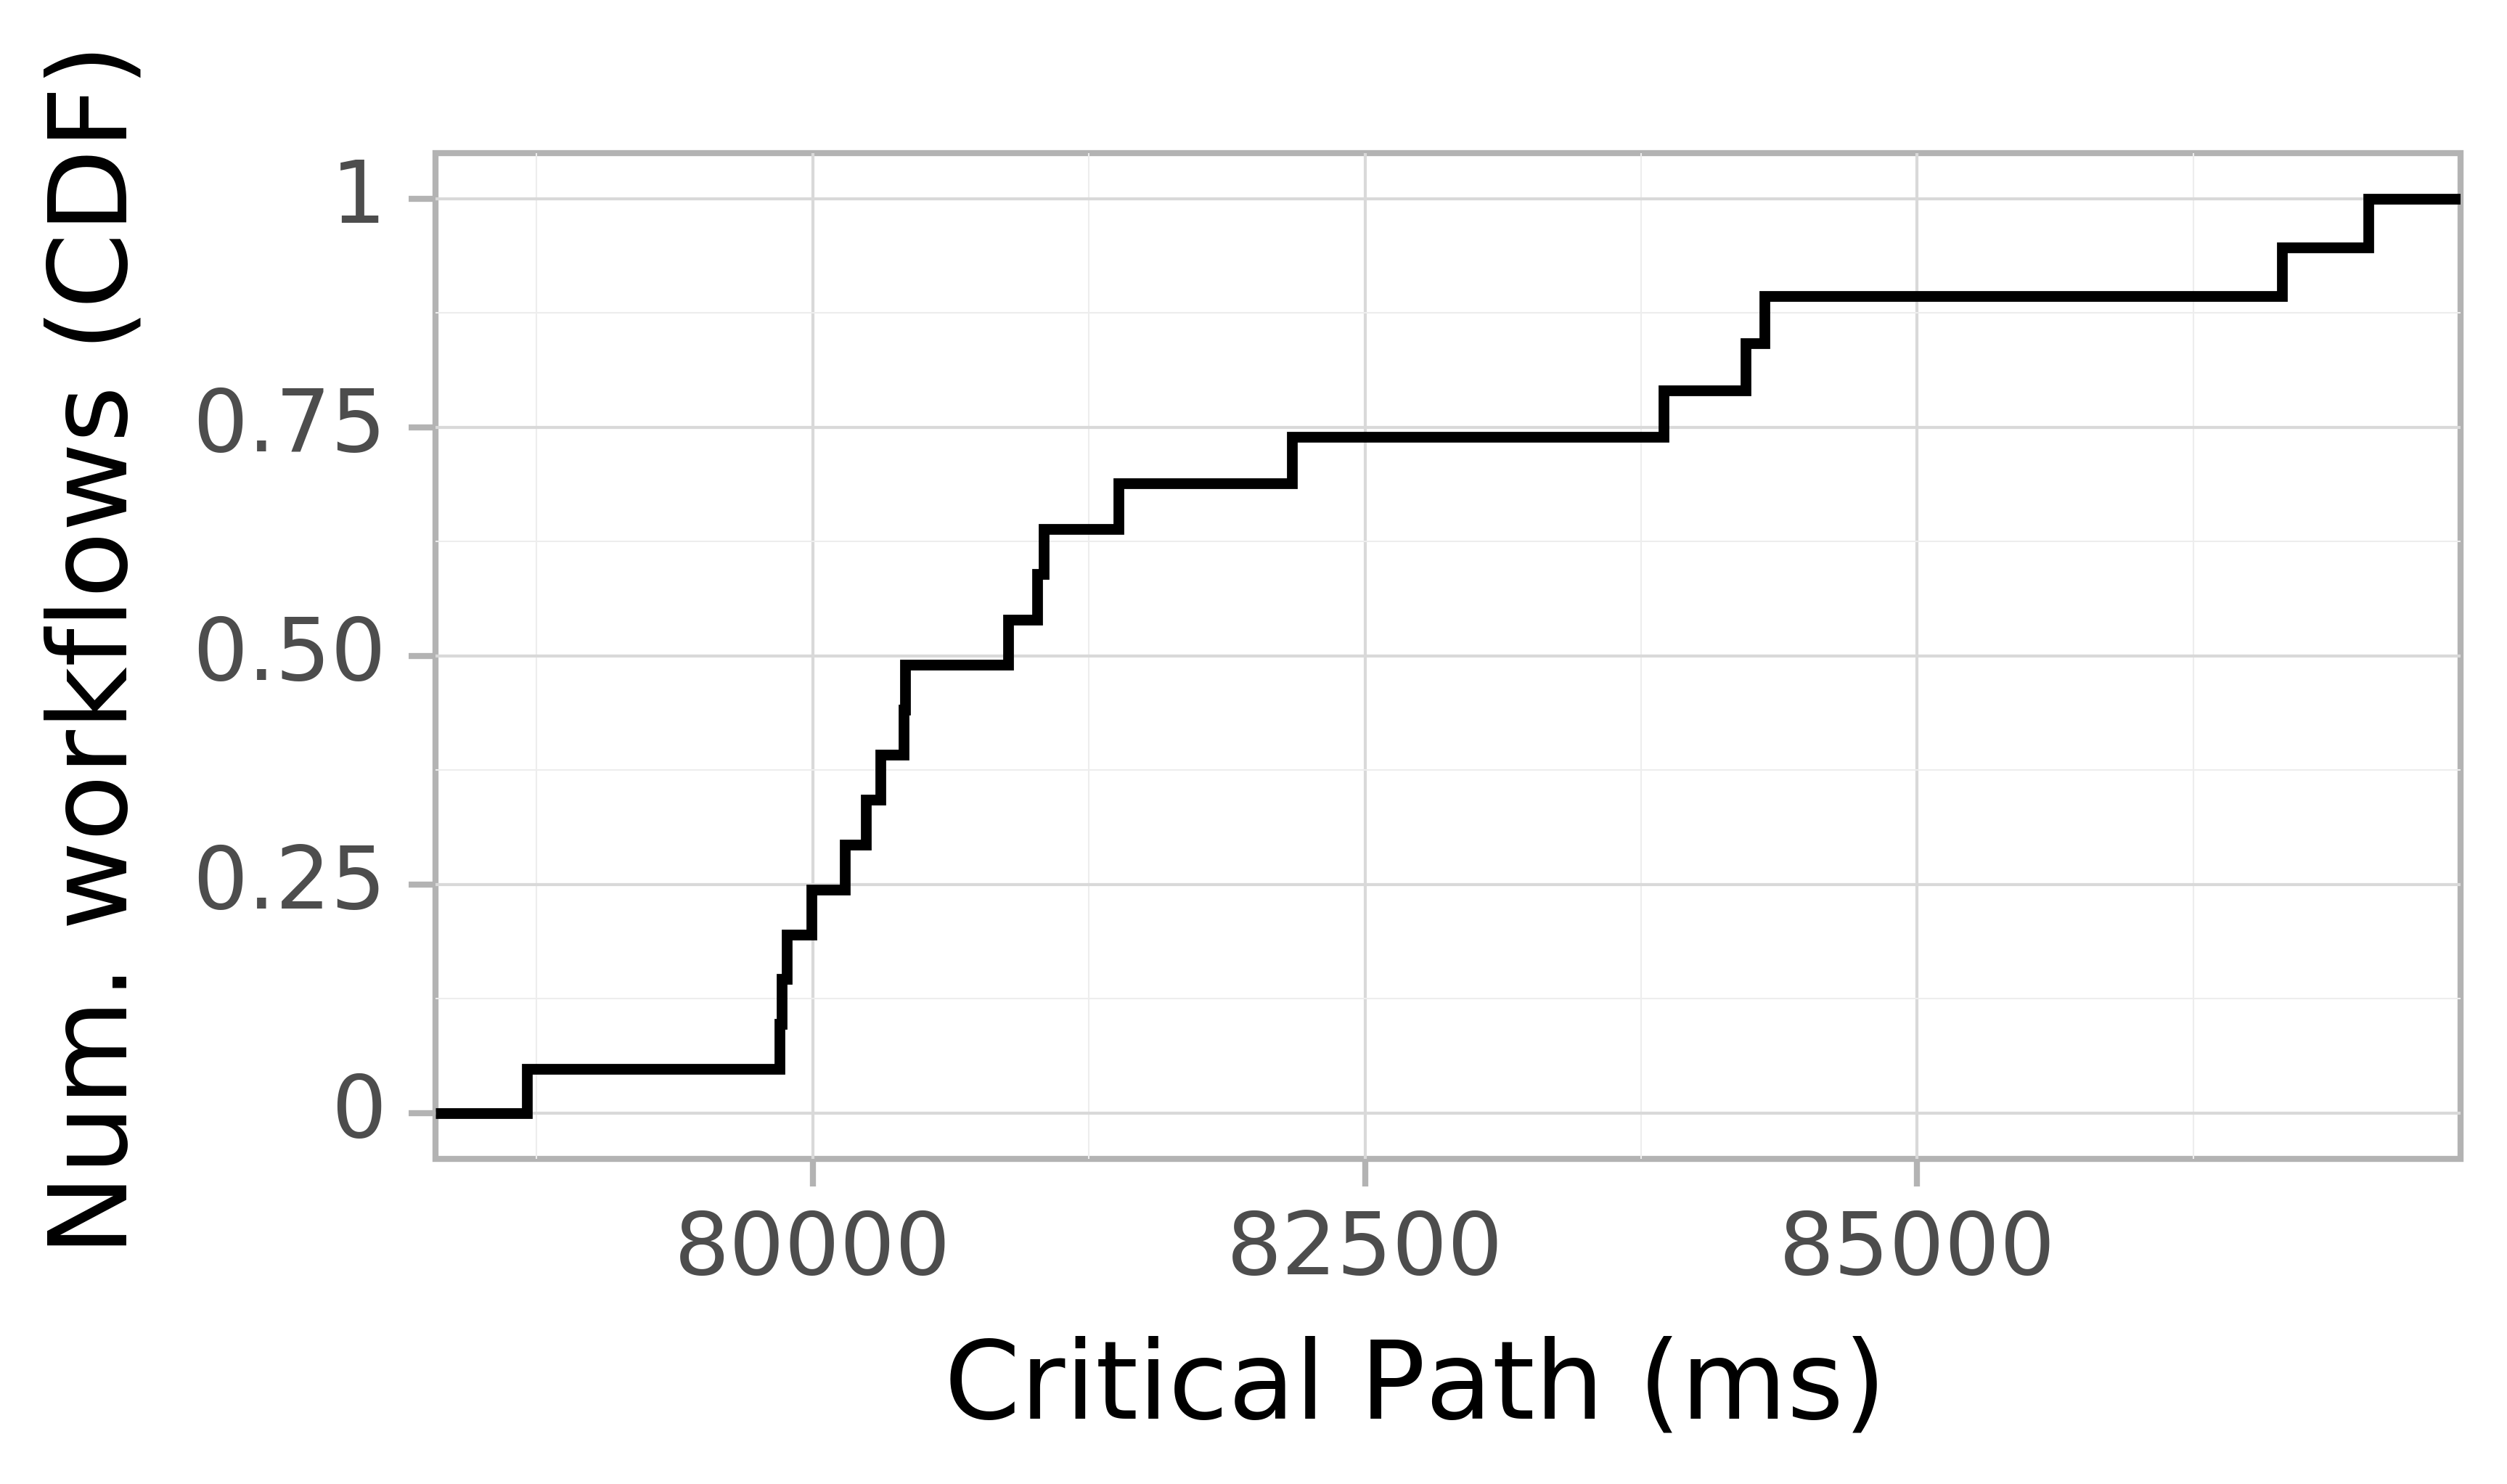 Job runtime CDF graph for the askalon-new_ee11 trace.